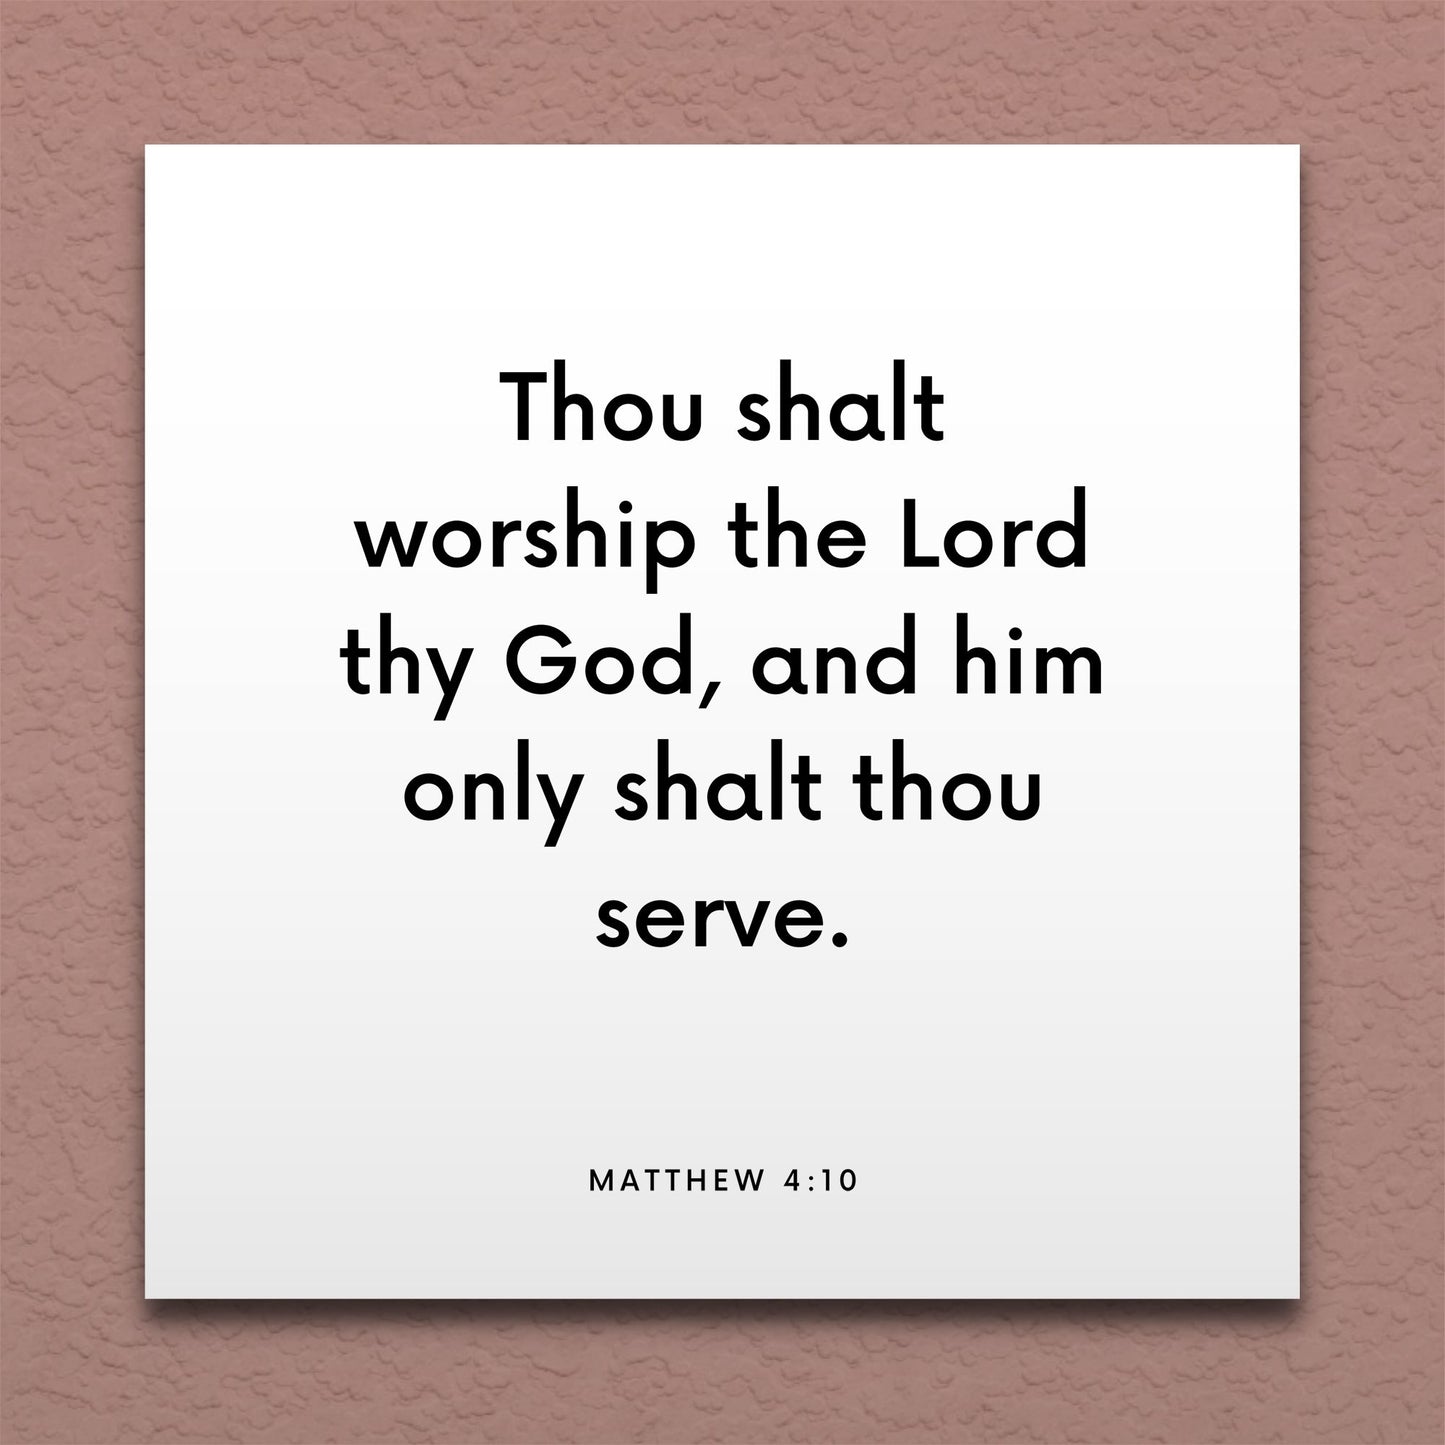 Wall-mounted scripture tile for Matthew 4:10 - "Thou shalt worship the Lord thy God"